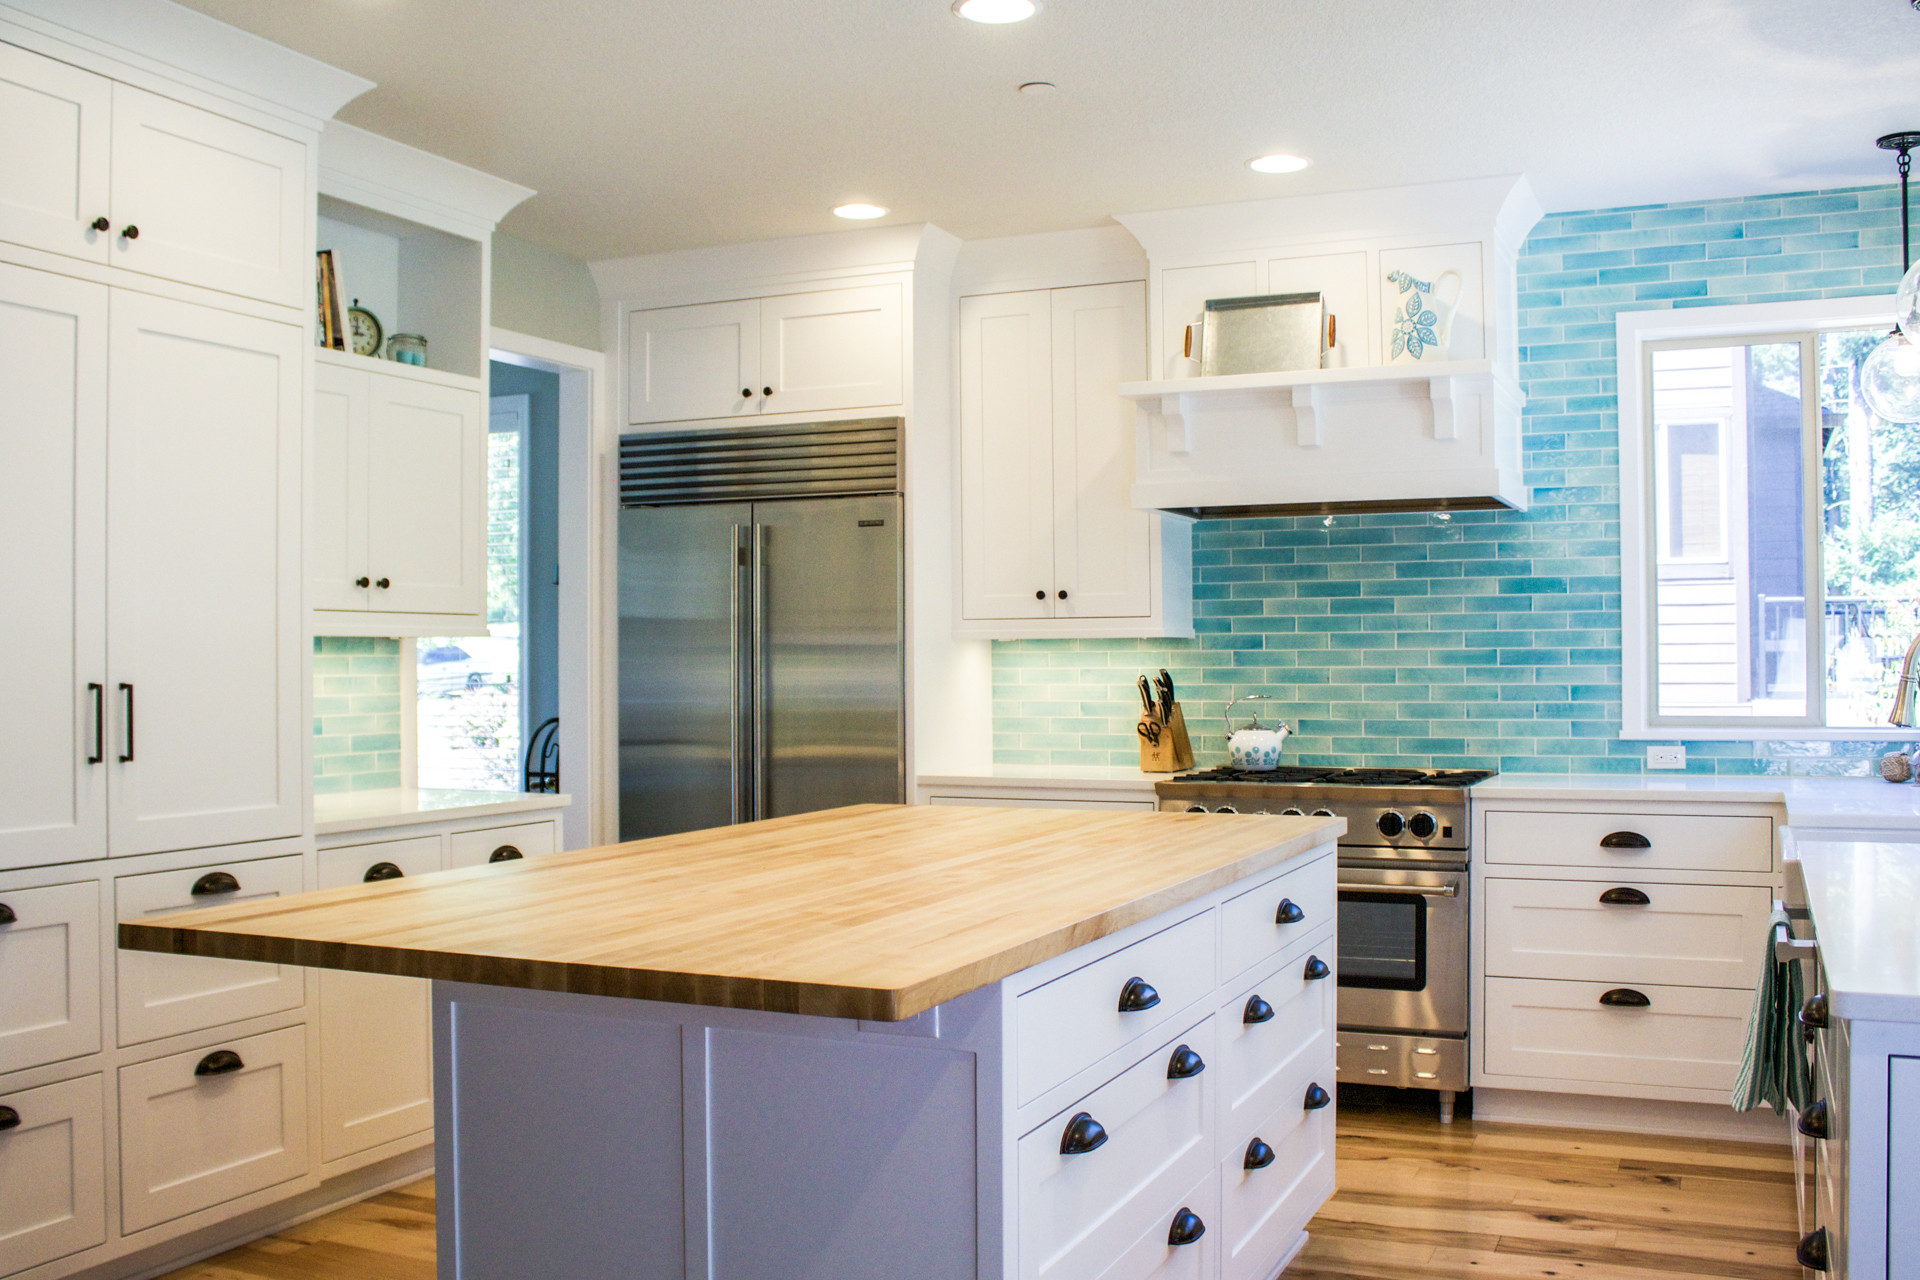 Blue Kitchen Tiles
 Custom designed kitchen with white cabinets and bold blue